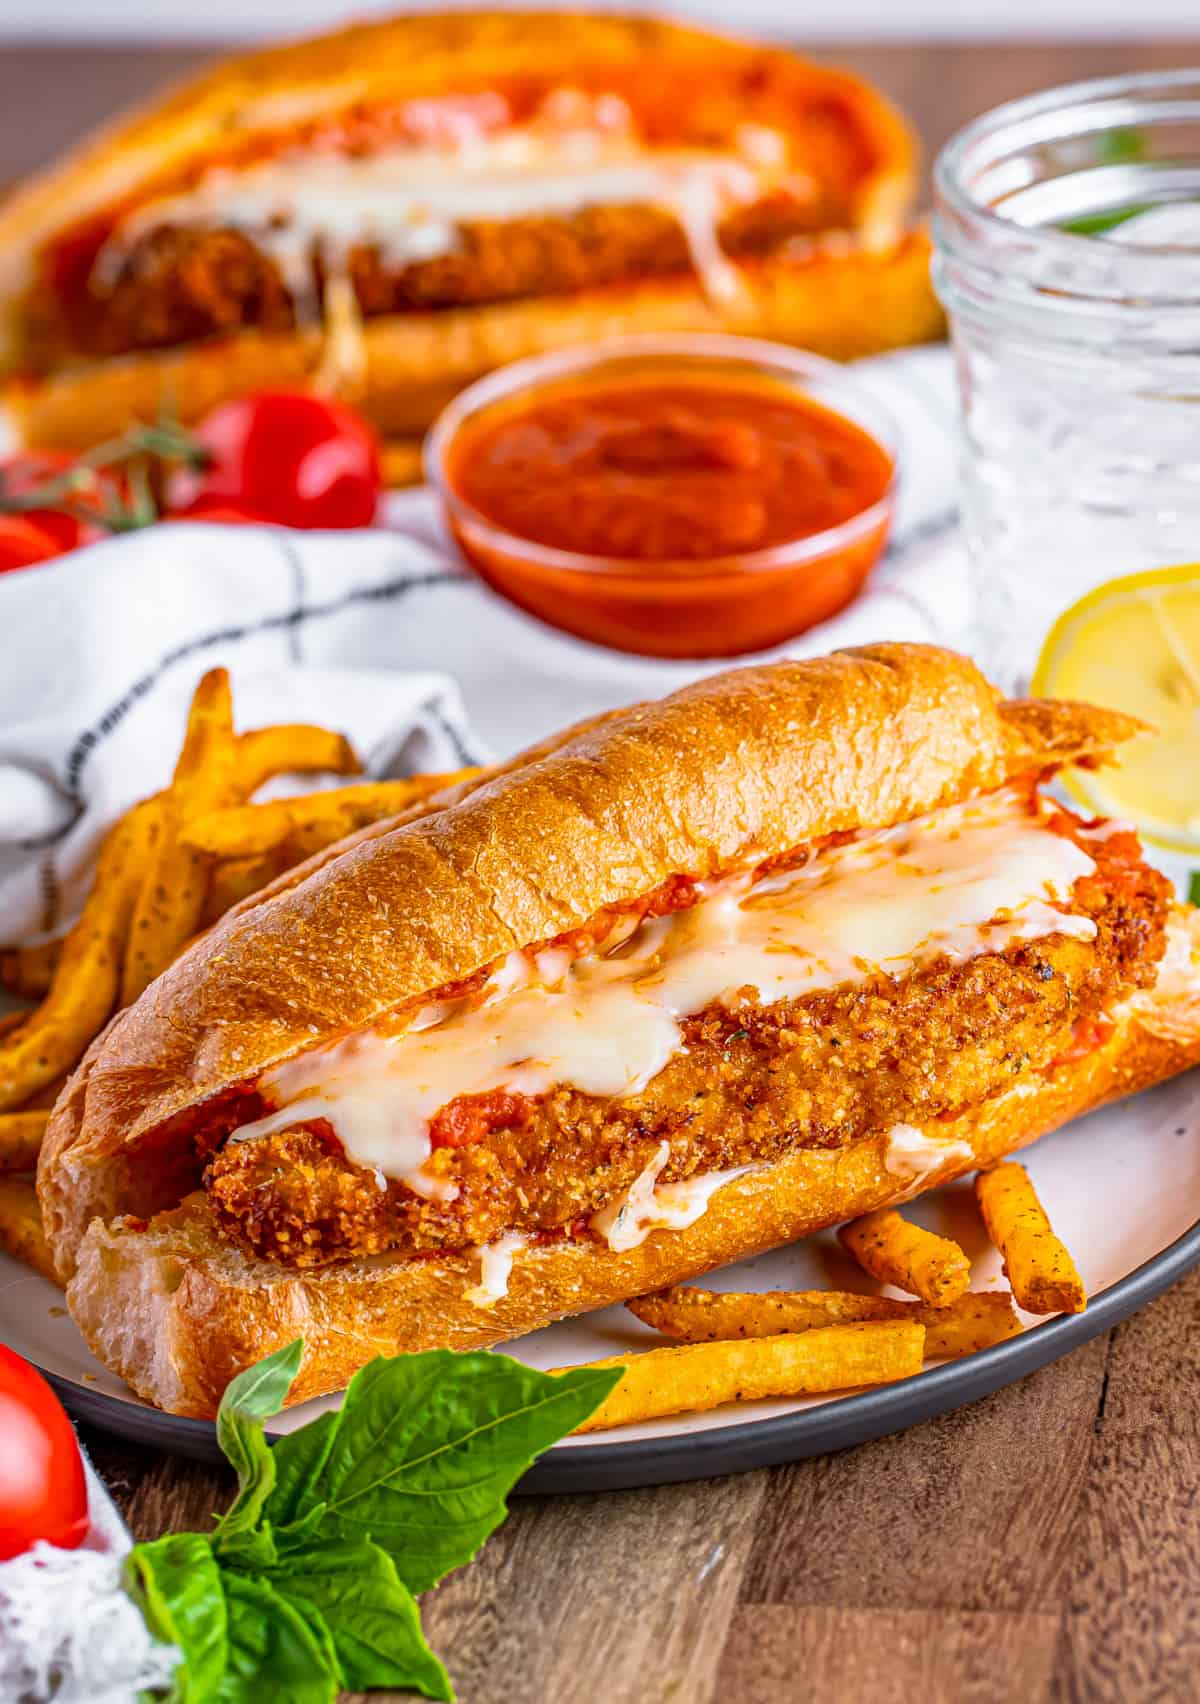 One of the Chicken Parmesan Sandwiches on plate with fries.